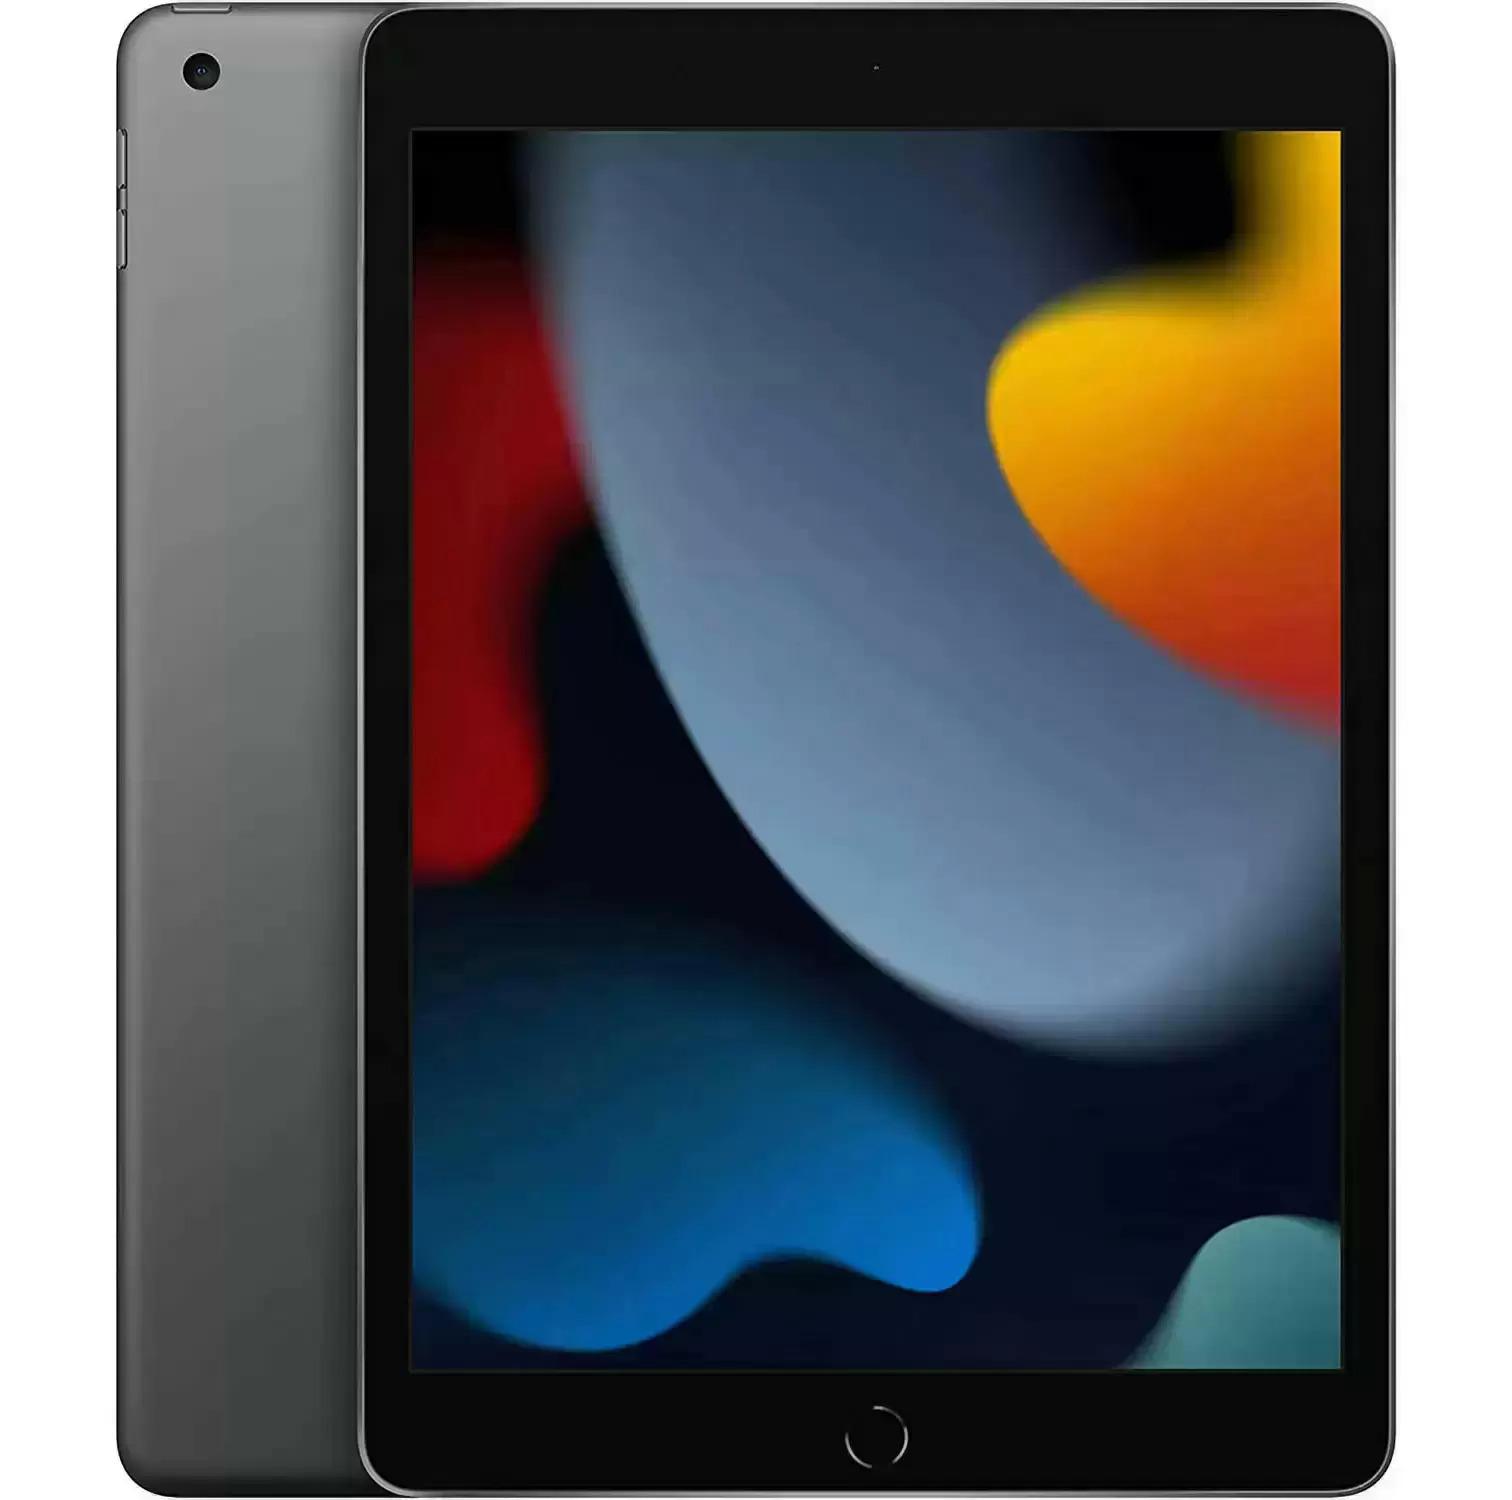 Apple 10.2in iPad 64GB WiFI Tablet for $249 Shipped